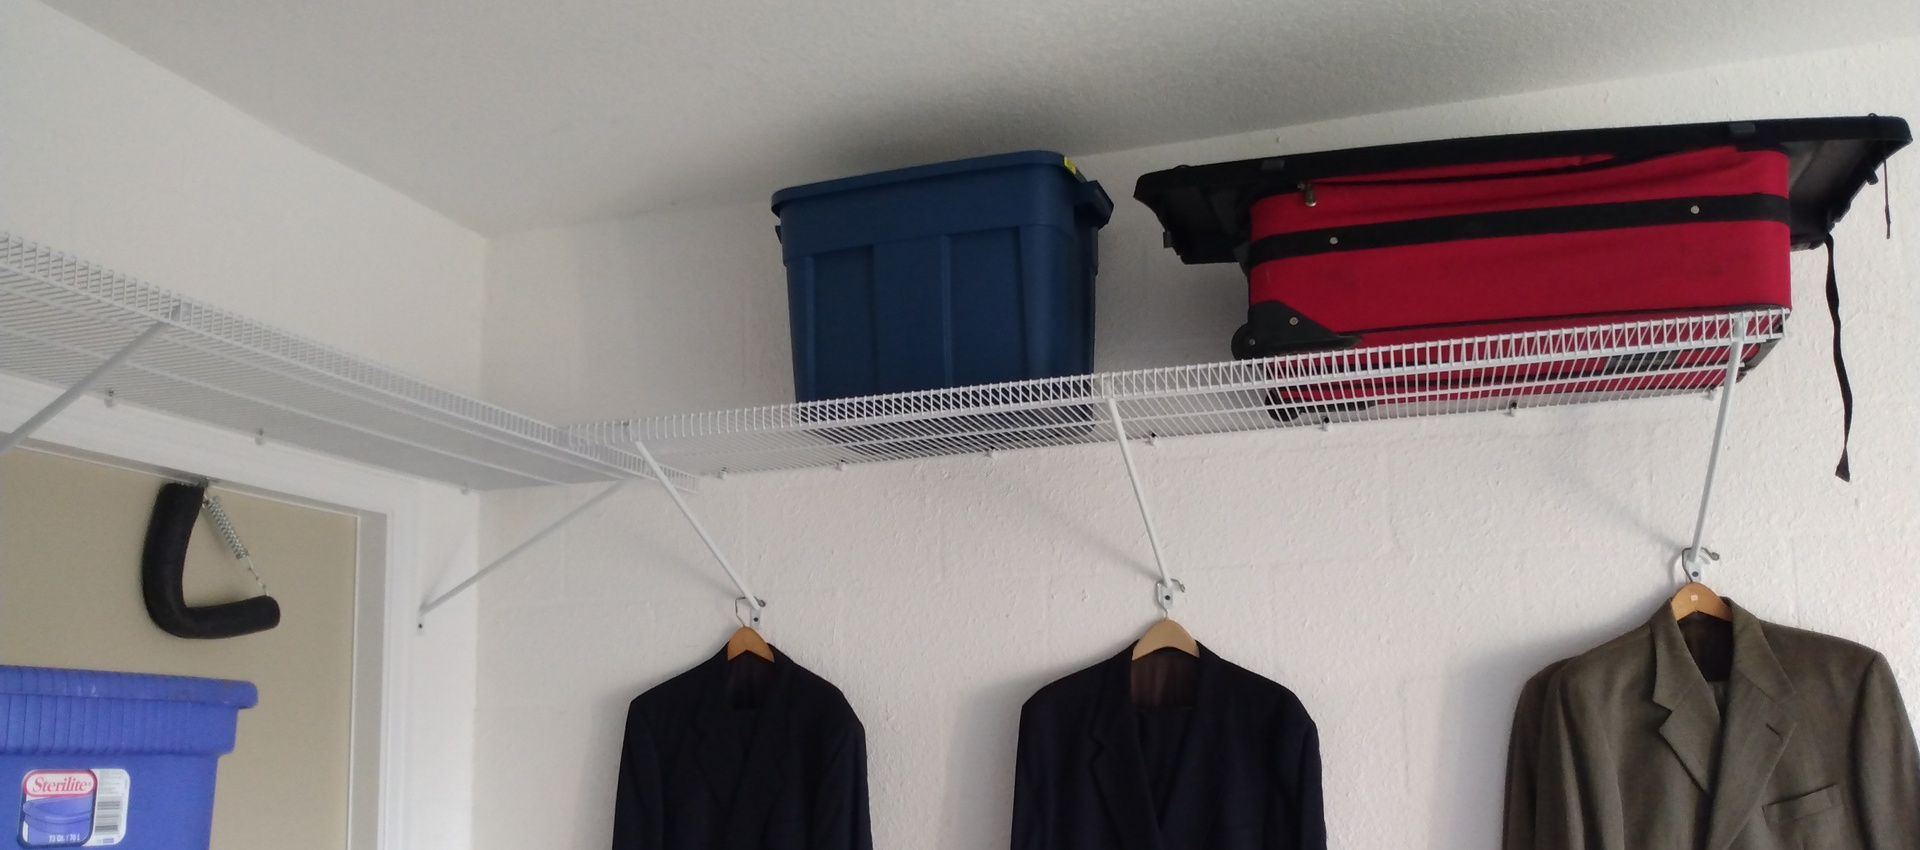 White metal wire shelves ClosetMaid installed on masonry block wall. Plastic boxes and suits on it.